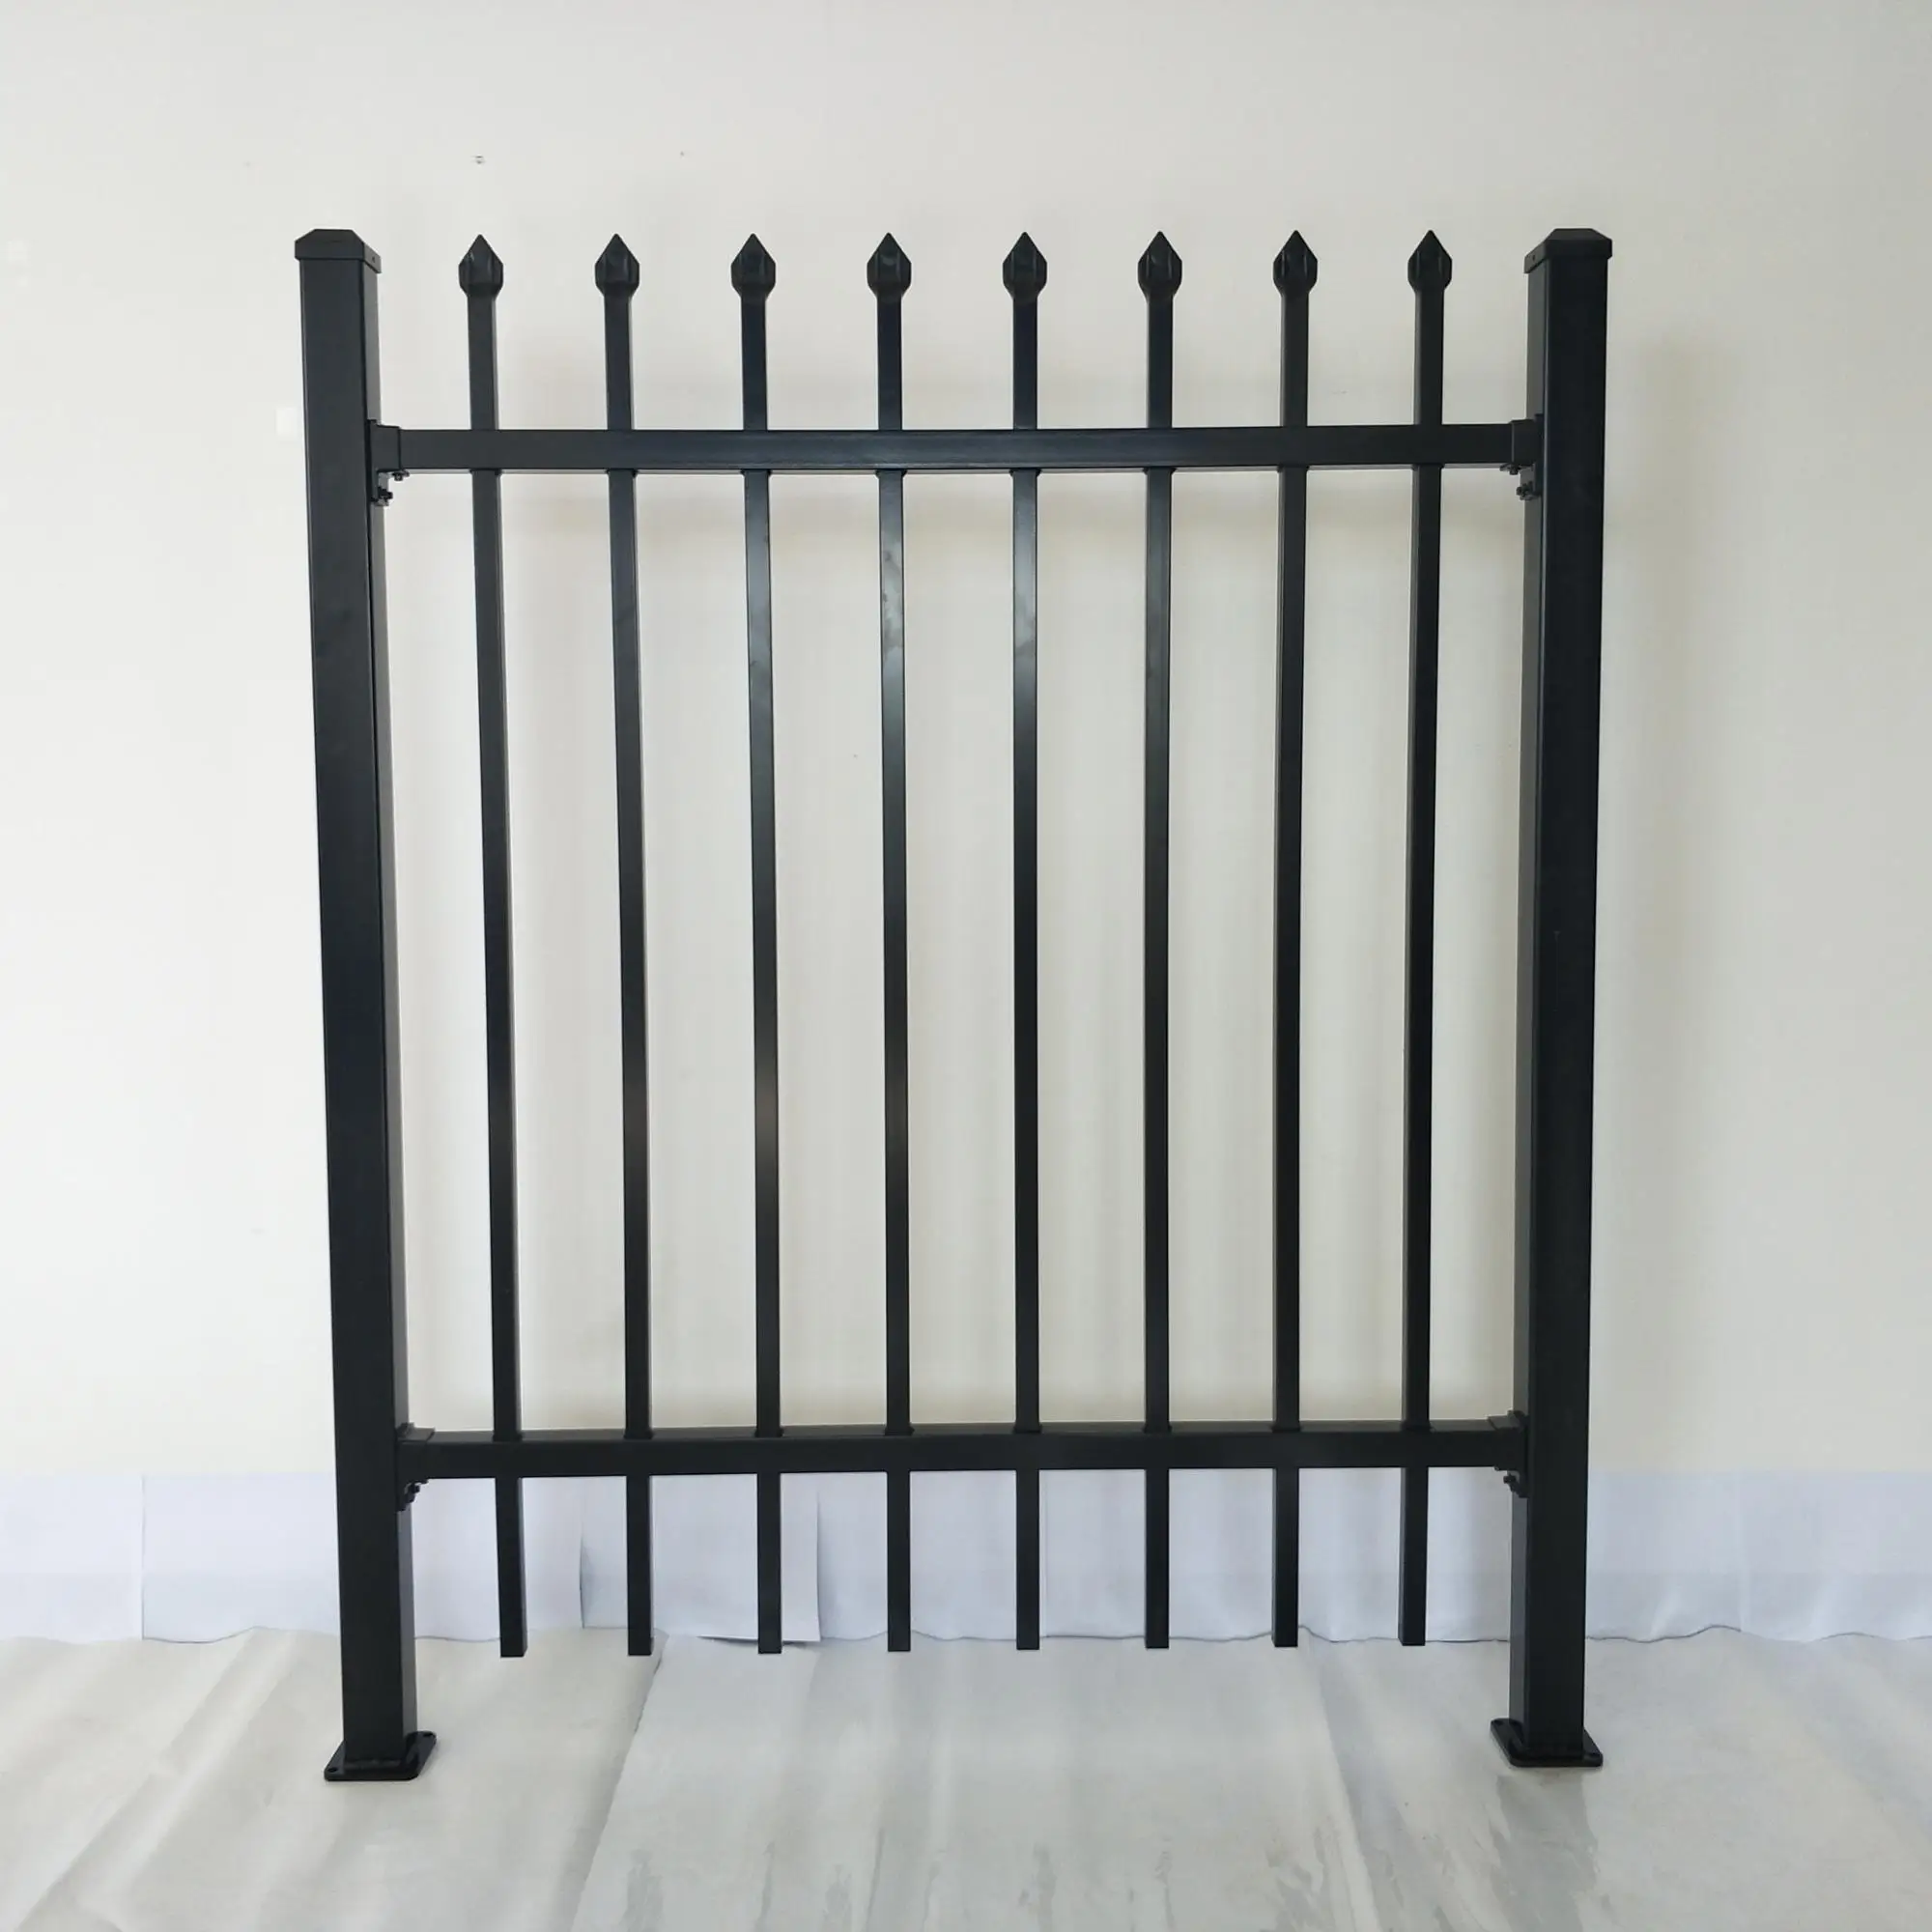 Aluminum Residential or Commerical Safety Fence Metal Garden Fence with modern styles